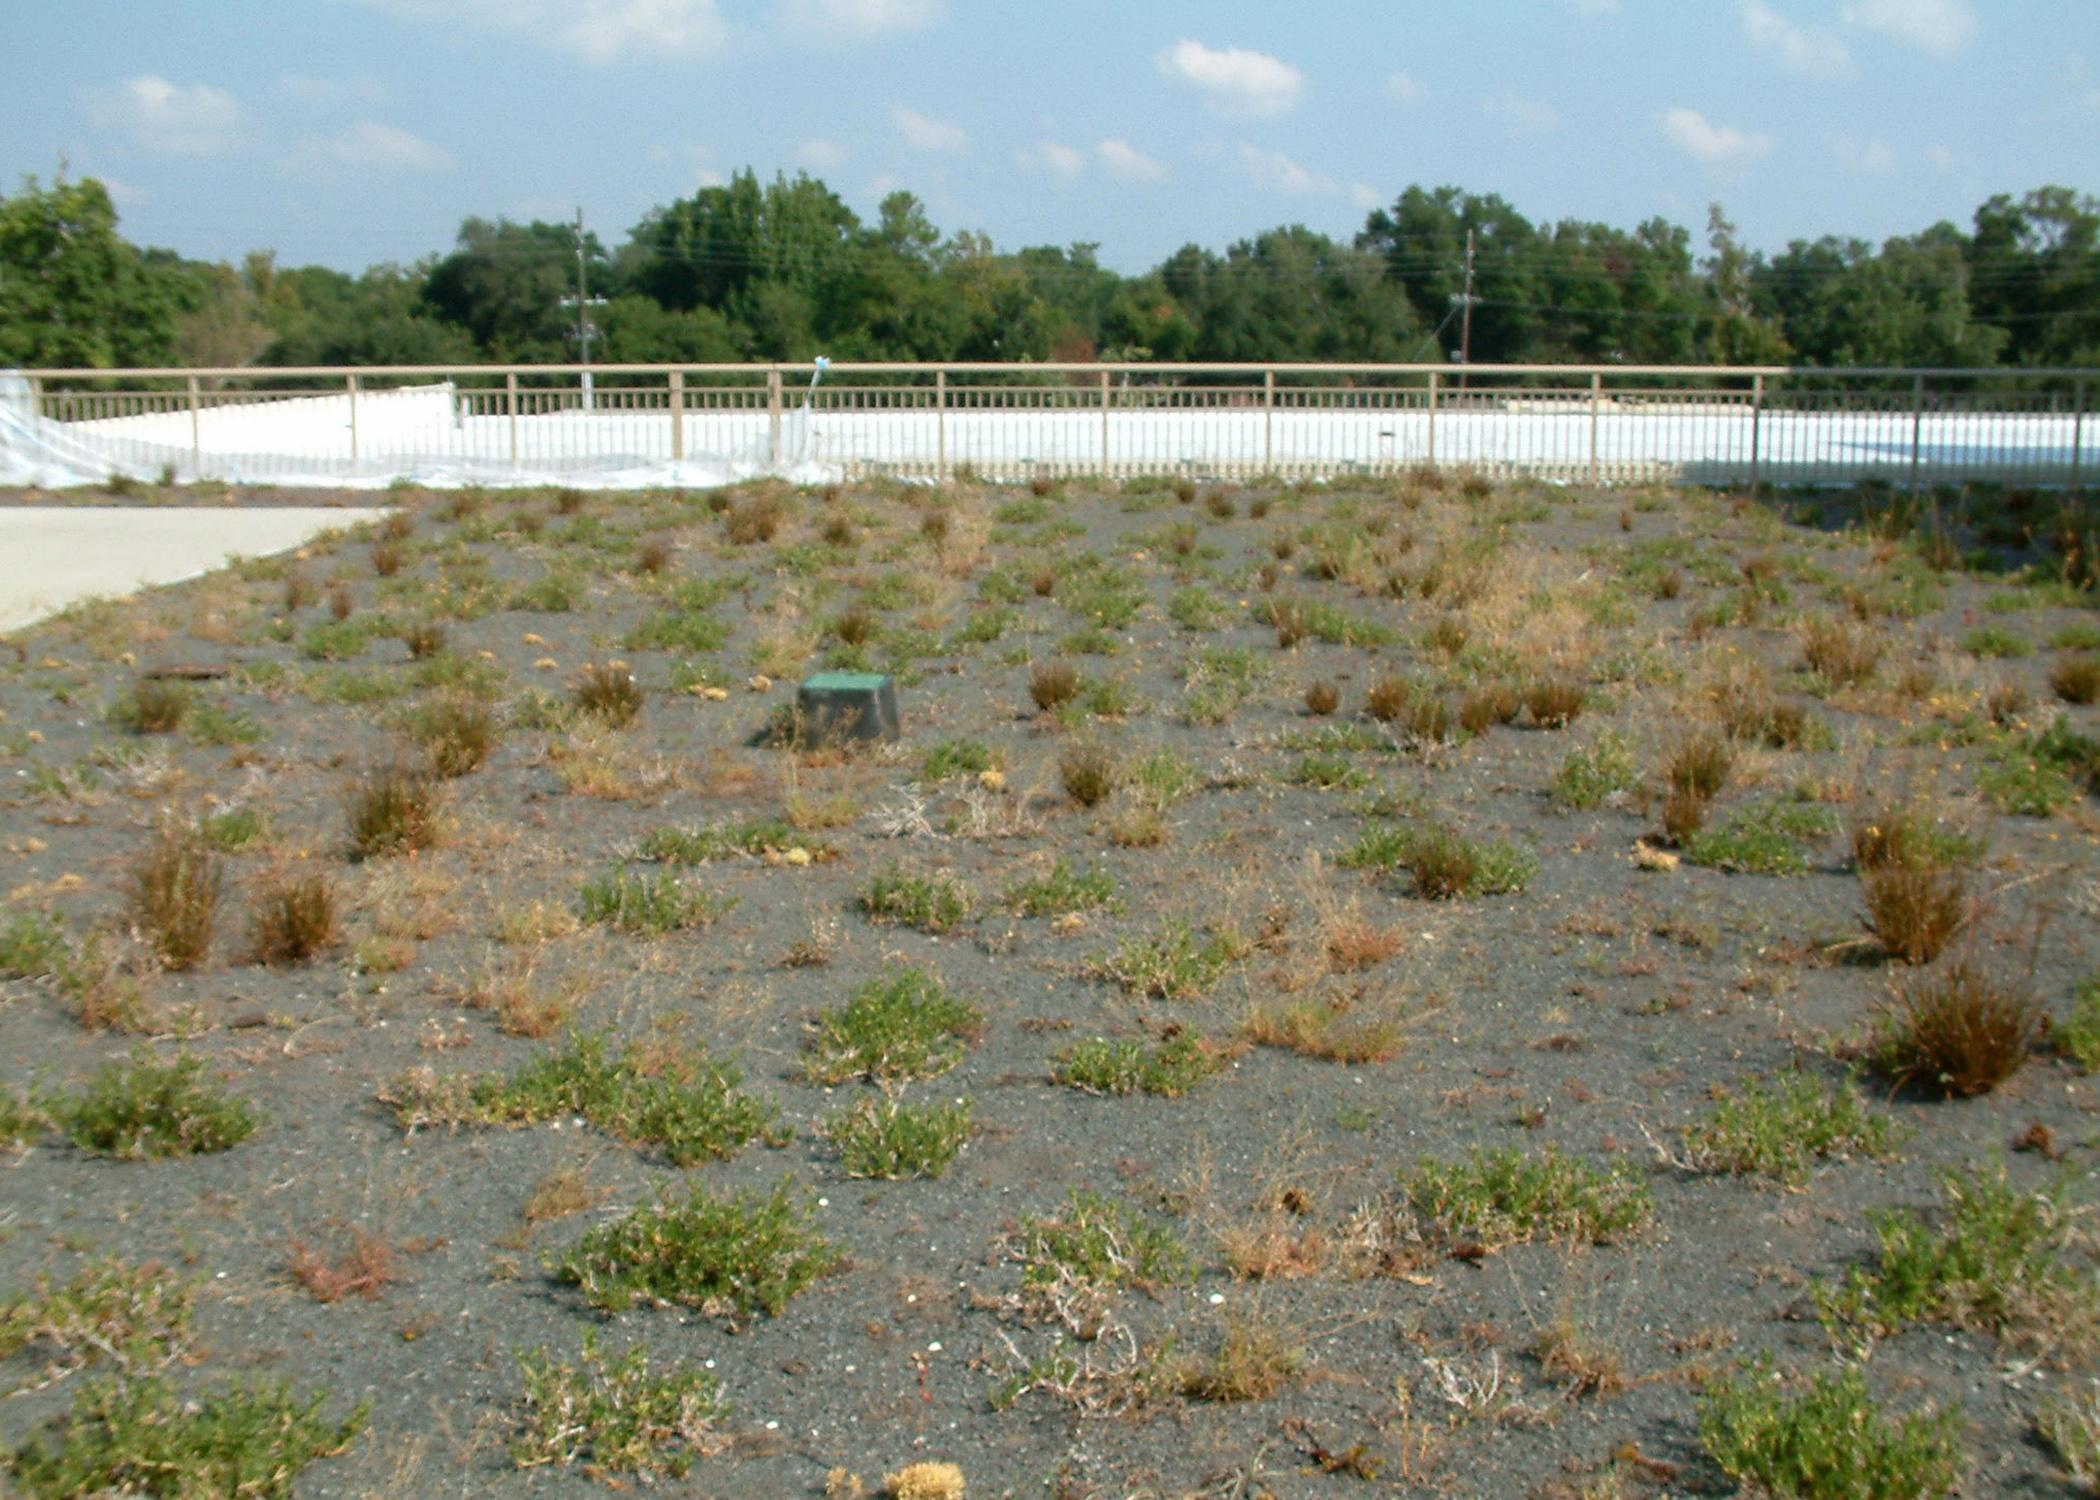 The rooftop gardens at the Gulfport Armed Forces Retirement Home were struggling before horticulture scientists at Mississippi State University planned and implemented a new maintenance plan. (MSU Ag Communications/Submitted photo)